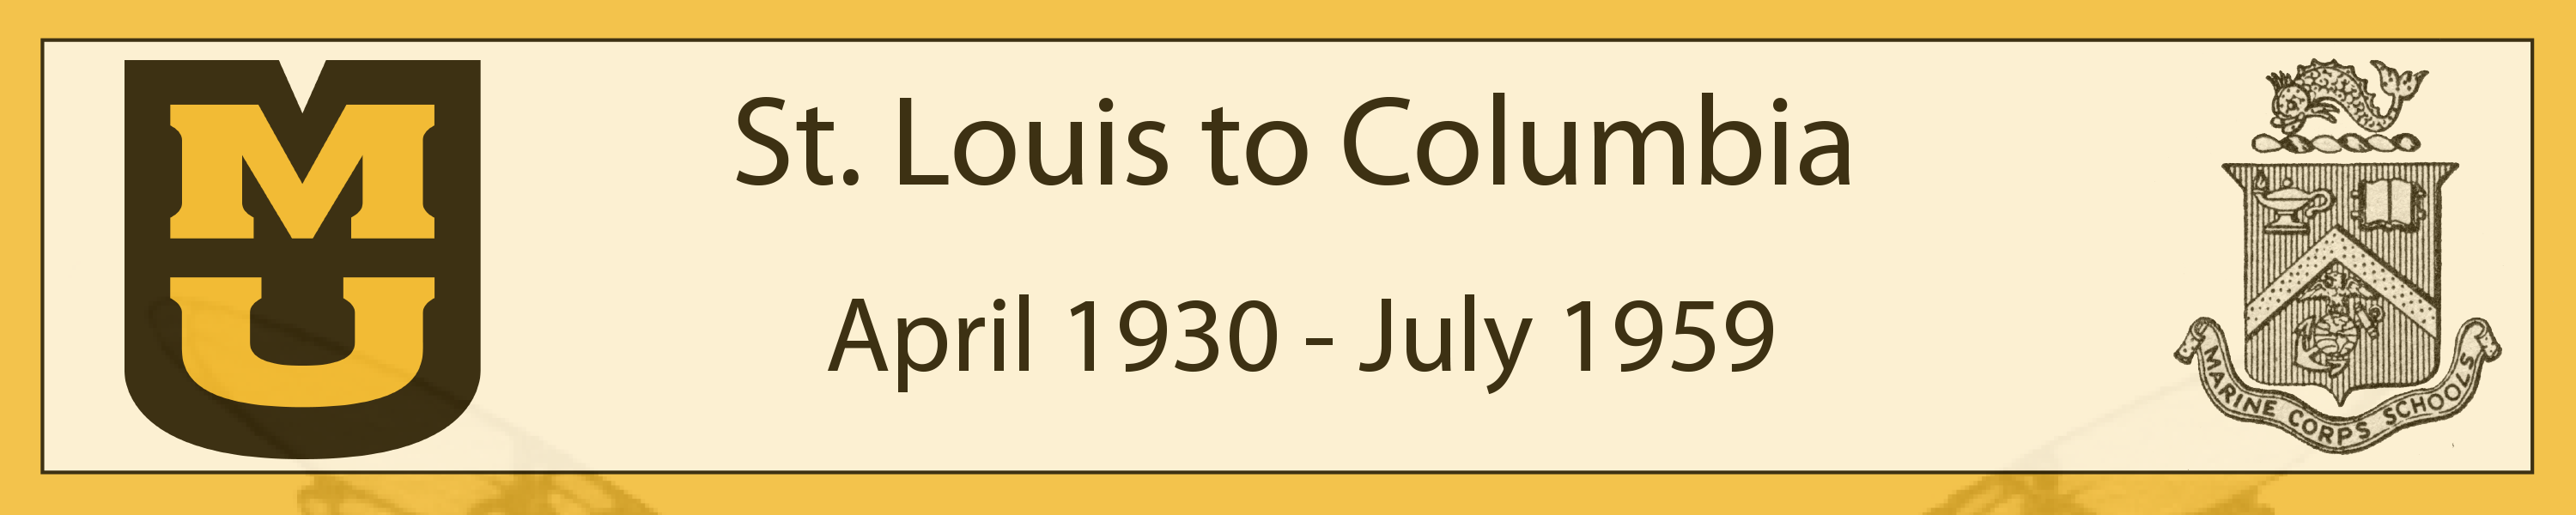 St. Louis to Columbia 1930-1959